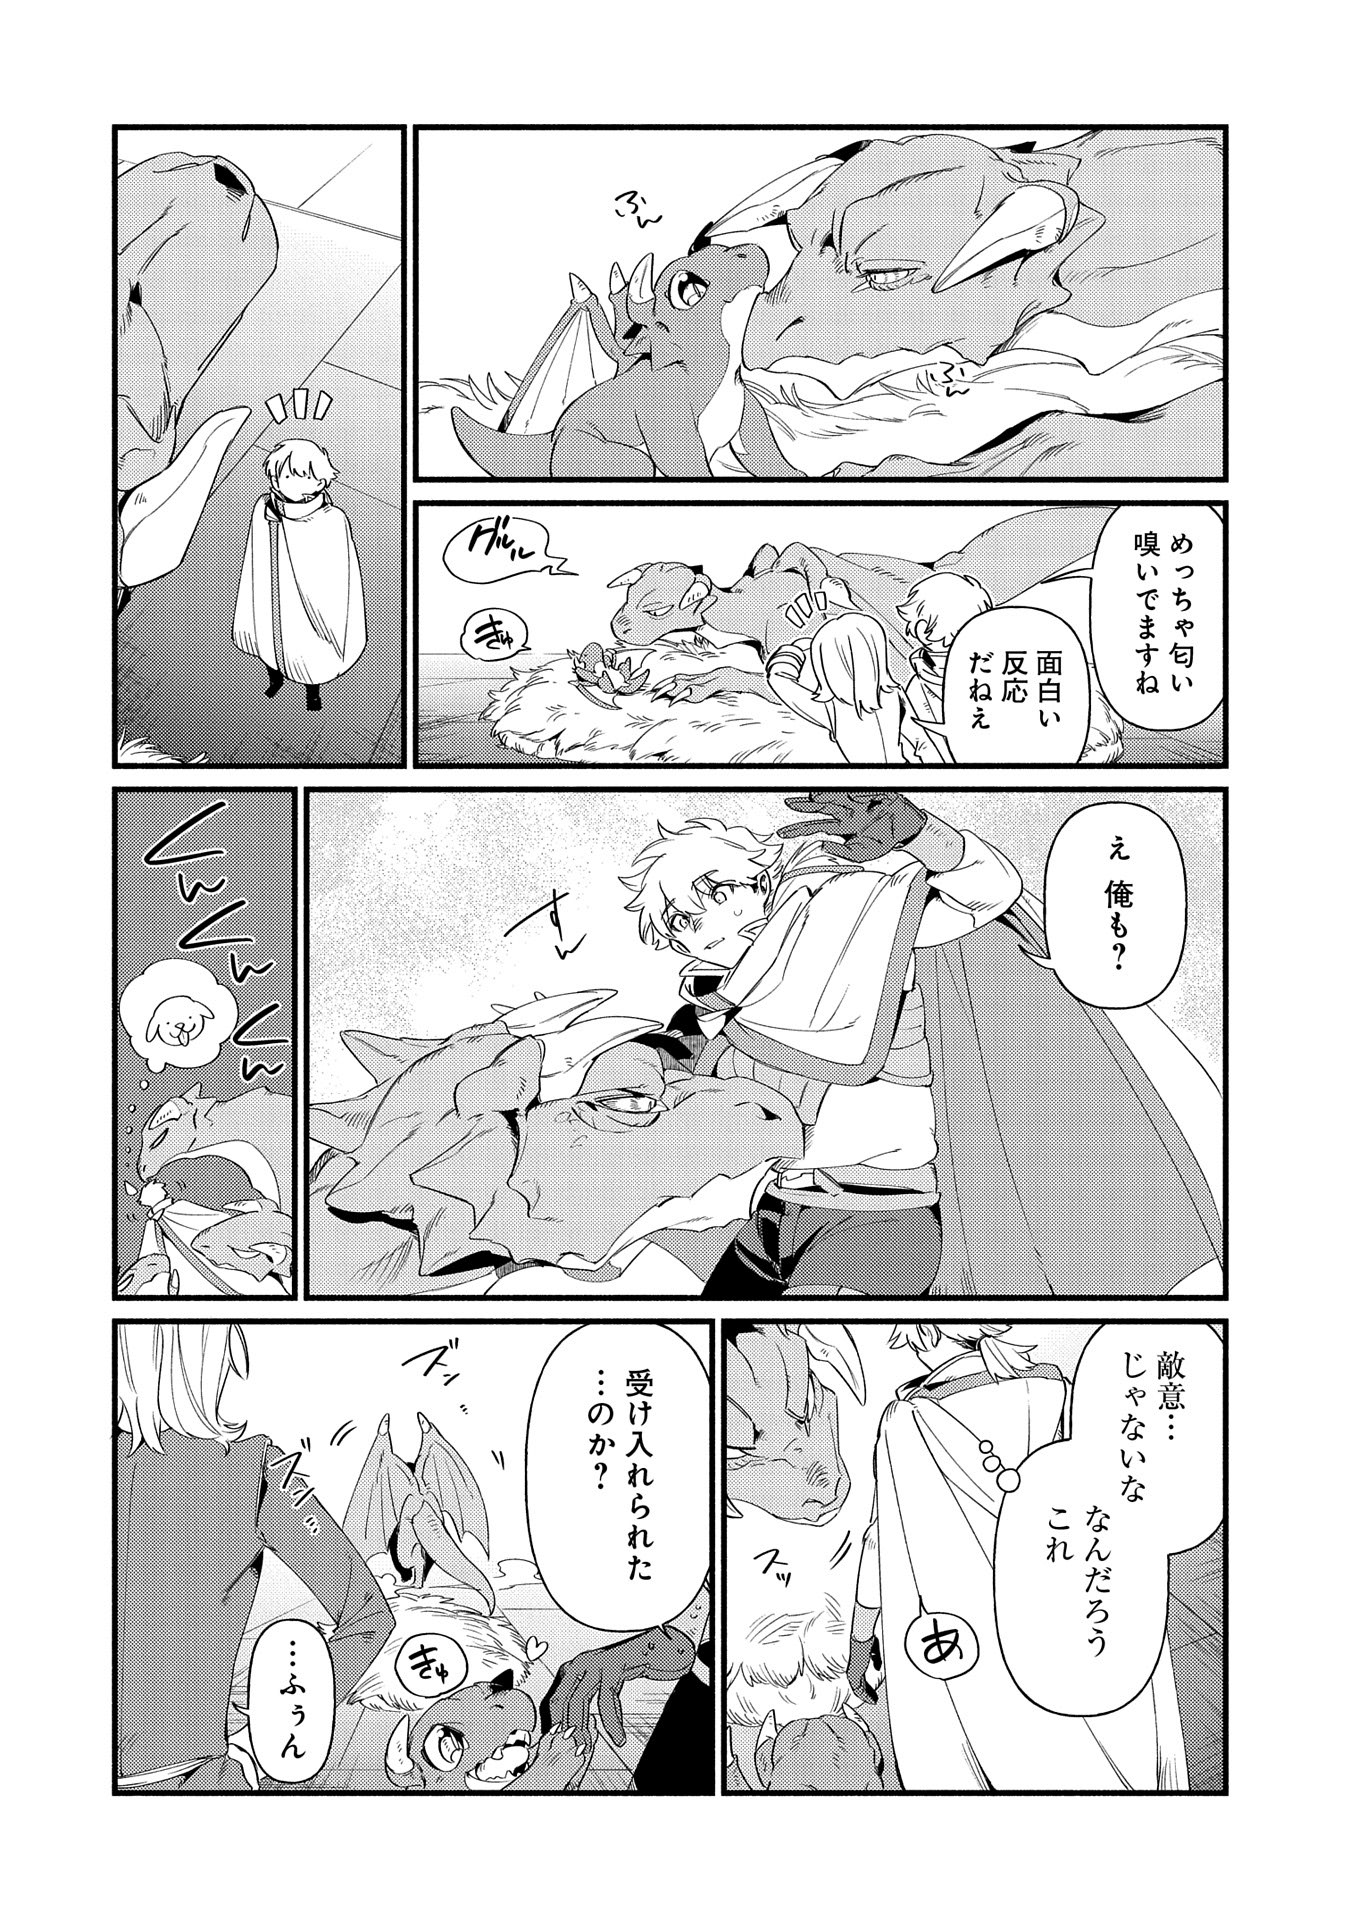 Nord’s Adventure 第12.2話 - Page 12